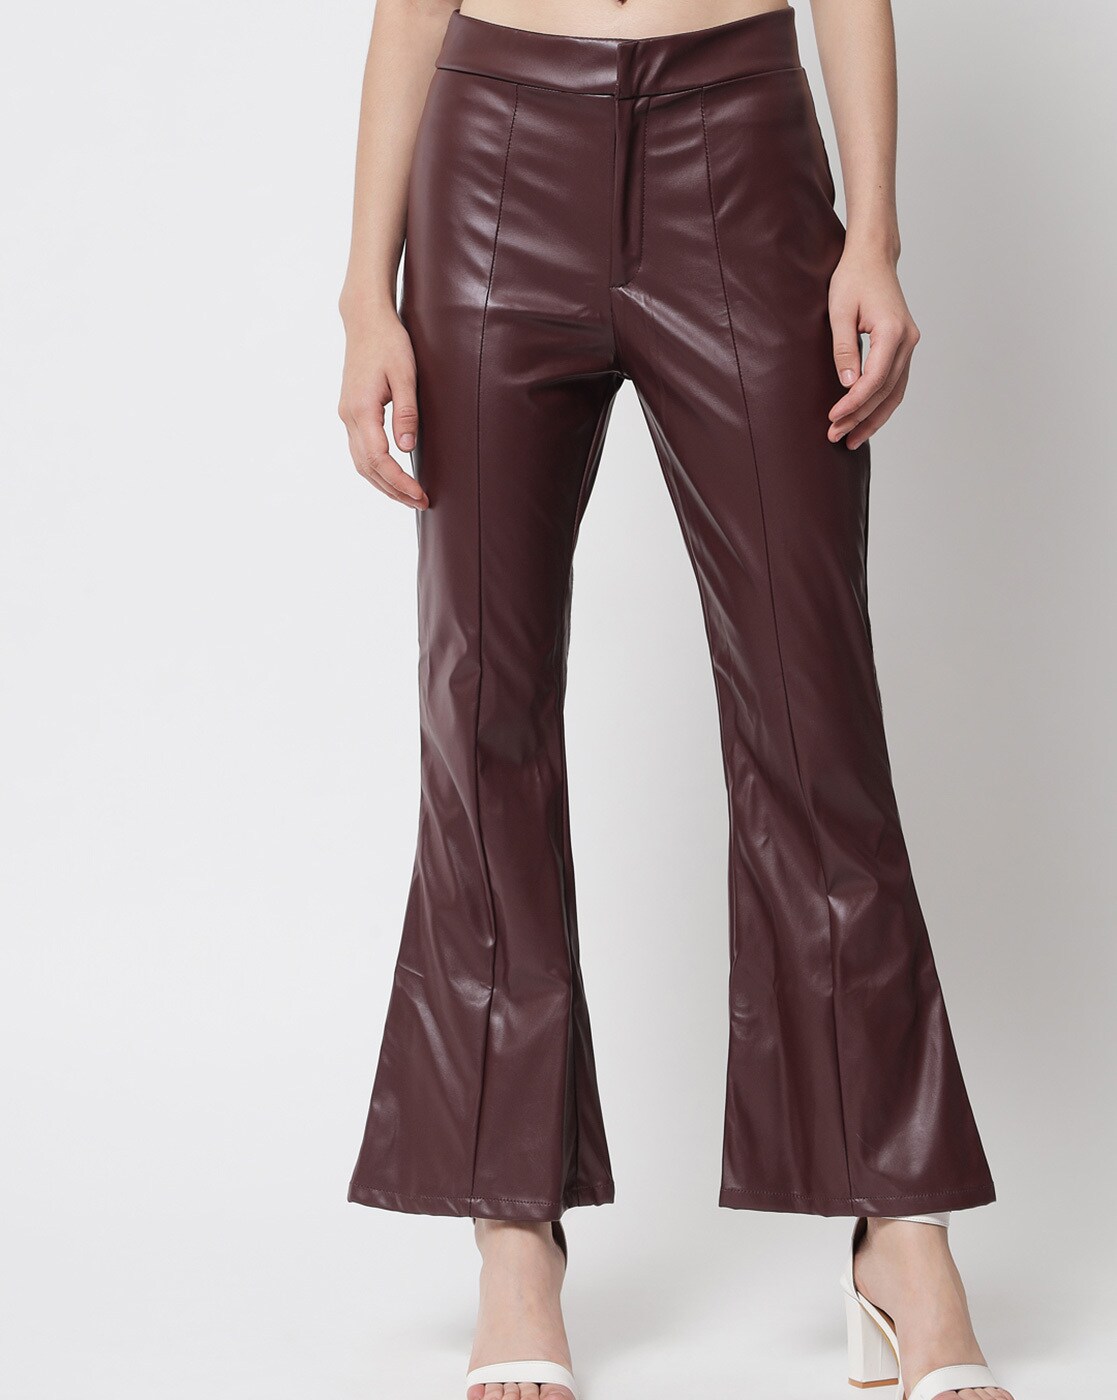 LBLC The Label Trousers and Pants  Buy LBLC The Label Jen Vegan Leather  Trousers Online  Nykaa Fashion